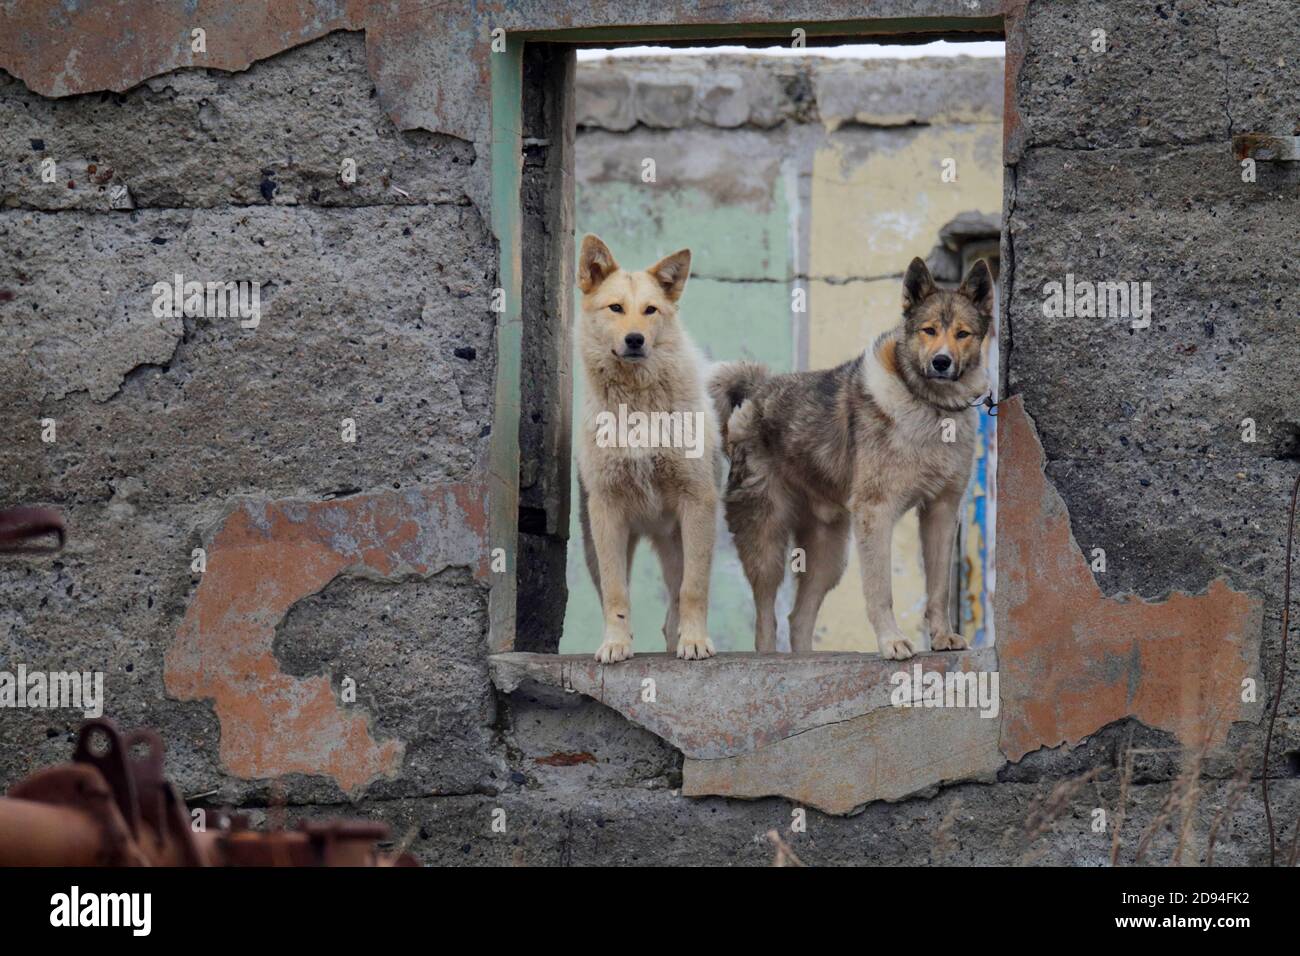 Two dogs at an empty window, shell of a house, Nikolskoye, Bering Island, Commander Islands, off Kamchatka, far east Russia 29th May 2012 Stock Photo